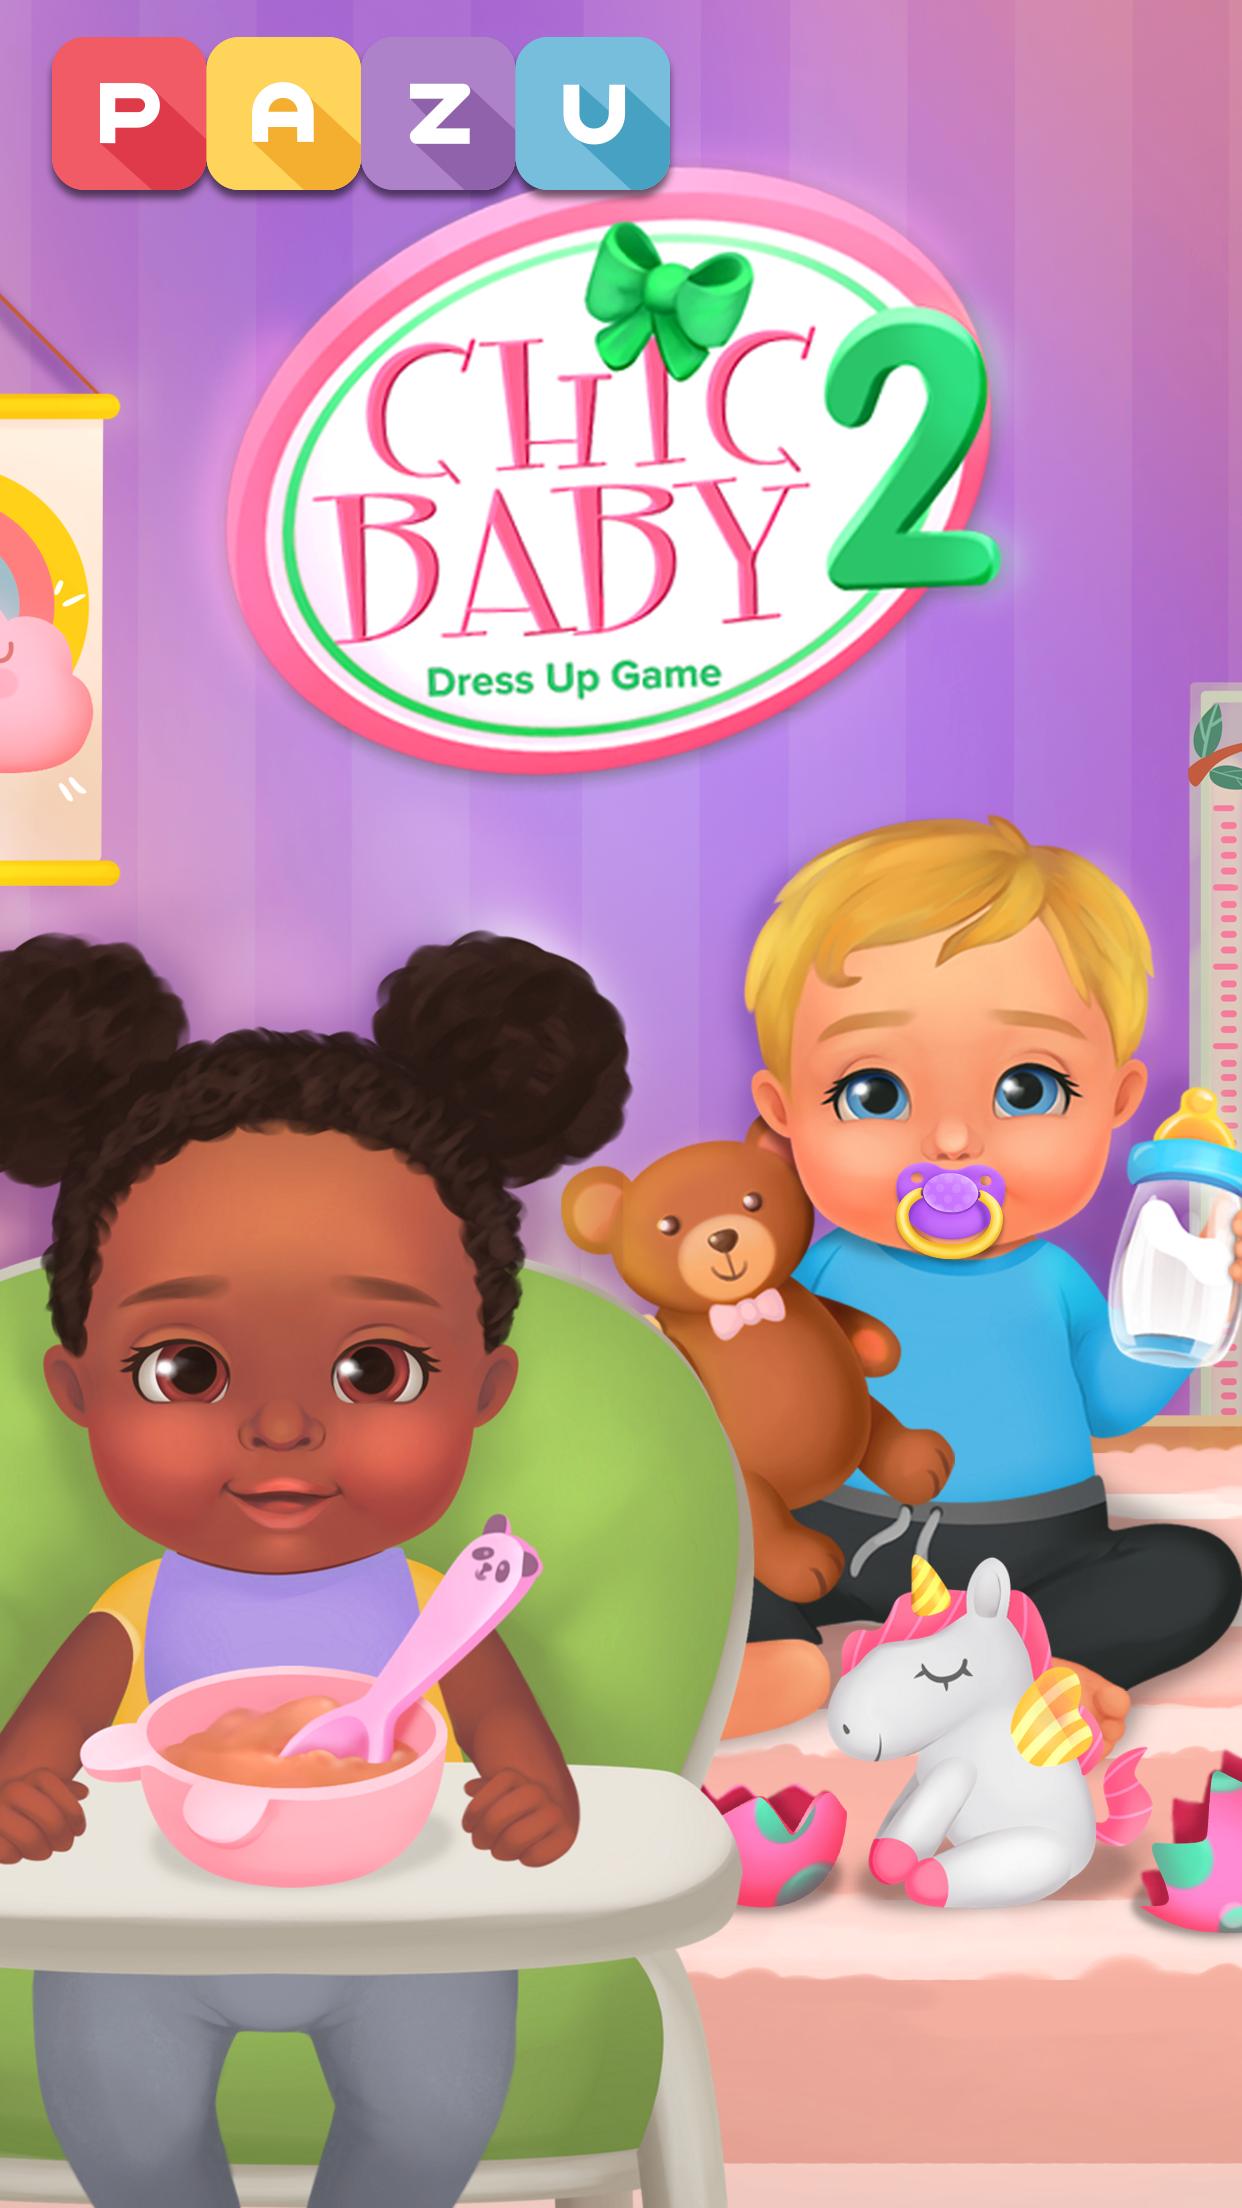 Chic Baby 2 Dress up & baby care games for kids screenshot